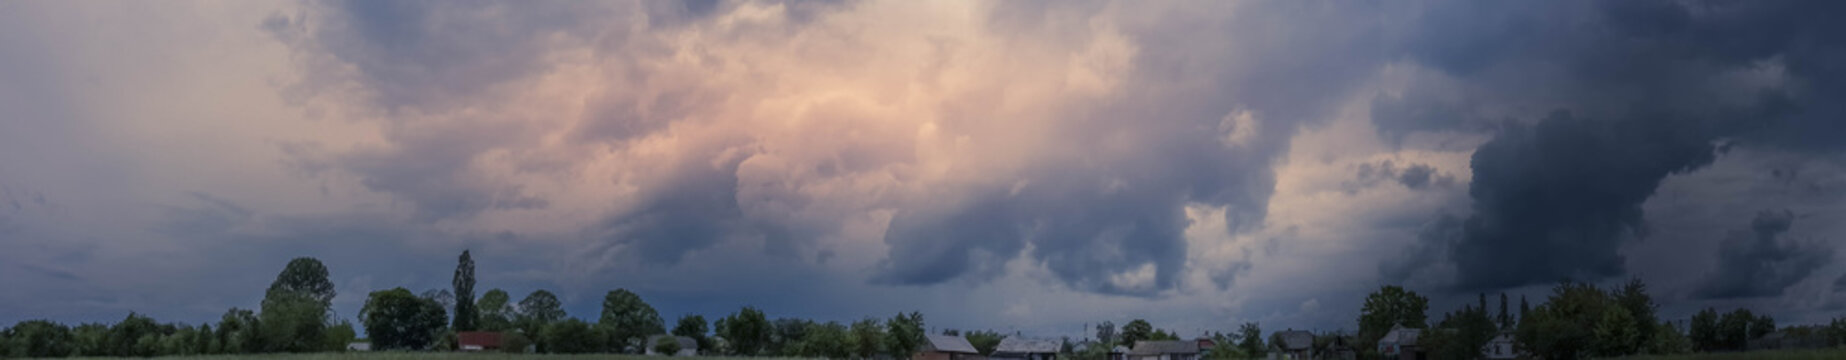 Beautiful thunderstorm clouds in dusky sky and countryside landscape